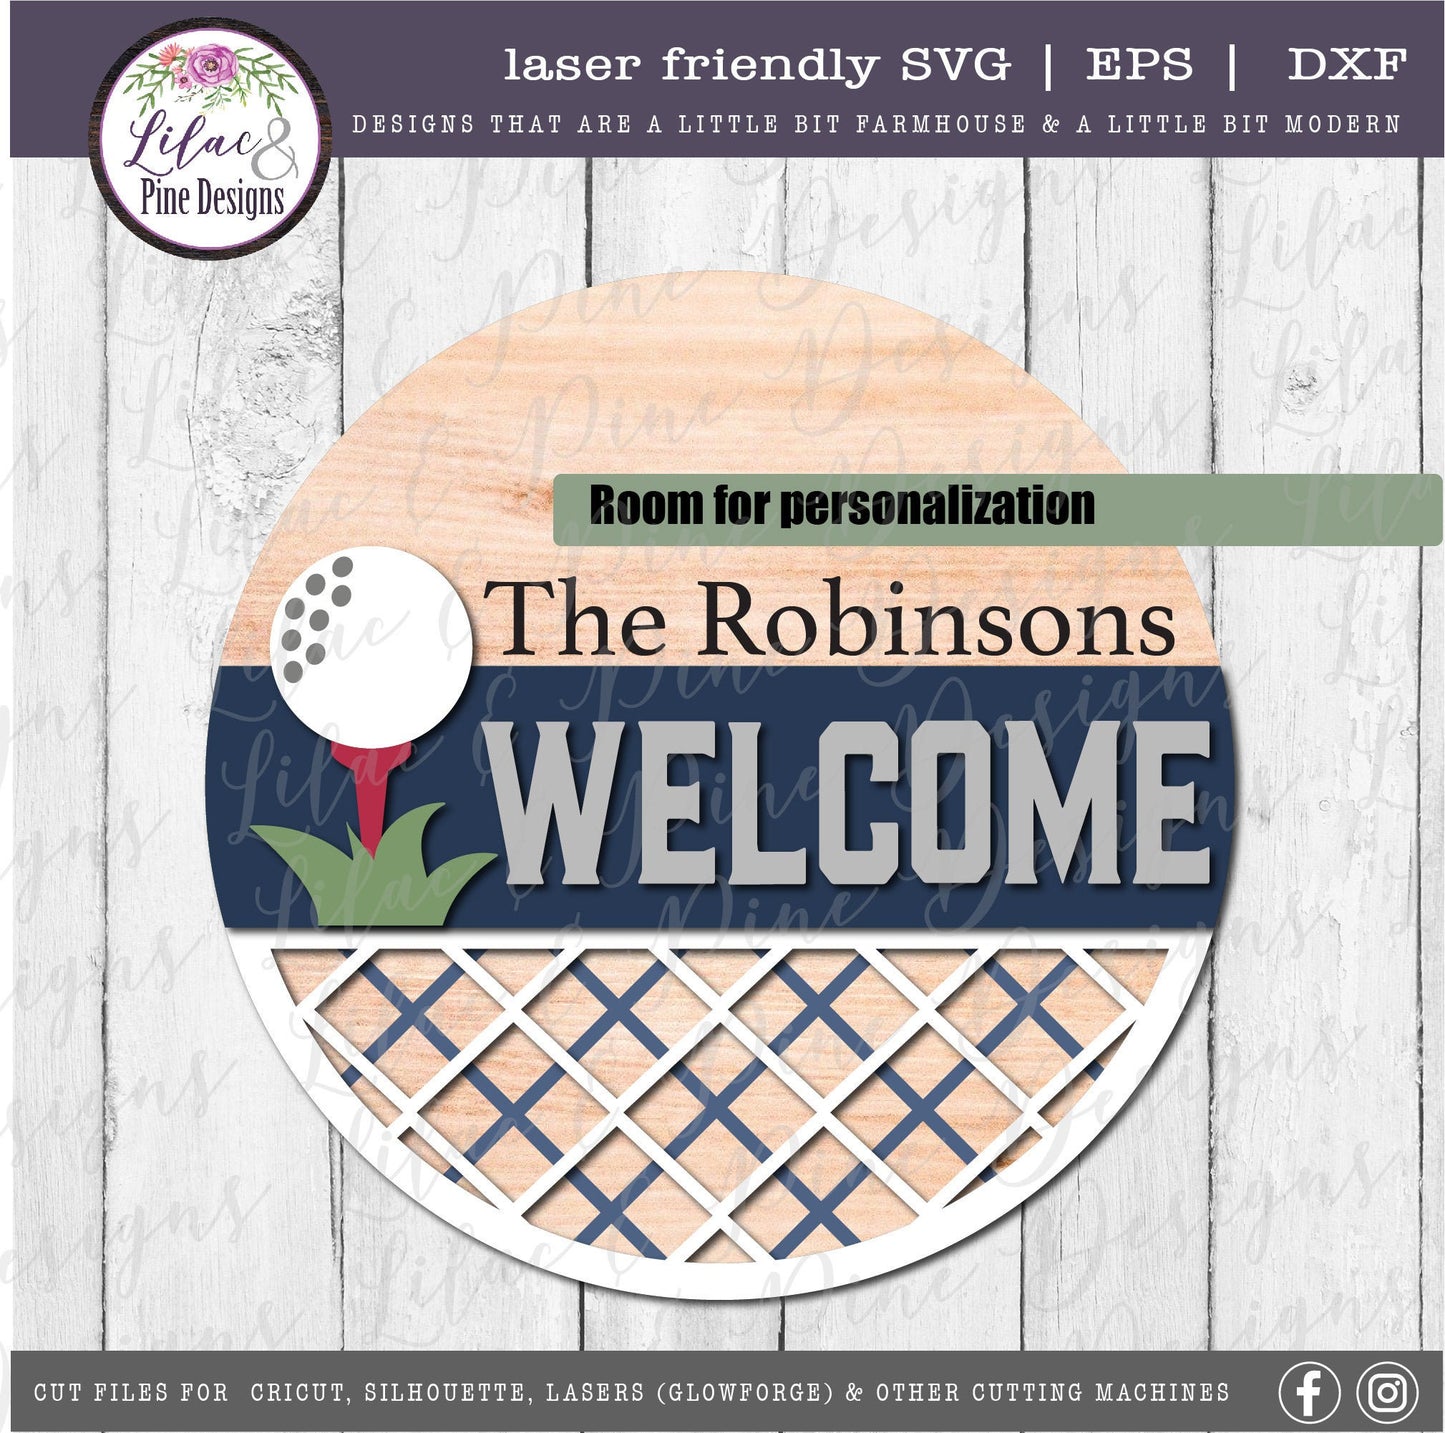 Golf Welcome sign, 19th hole round sign, golf decor SVG, round wood sign, welcome svg, golfer gift, Glowforge Svg, laser cut file